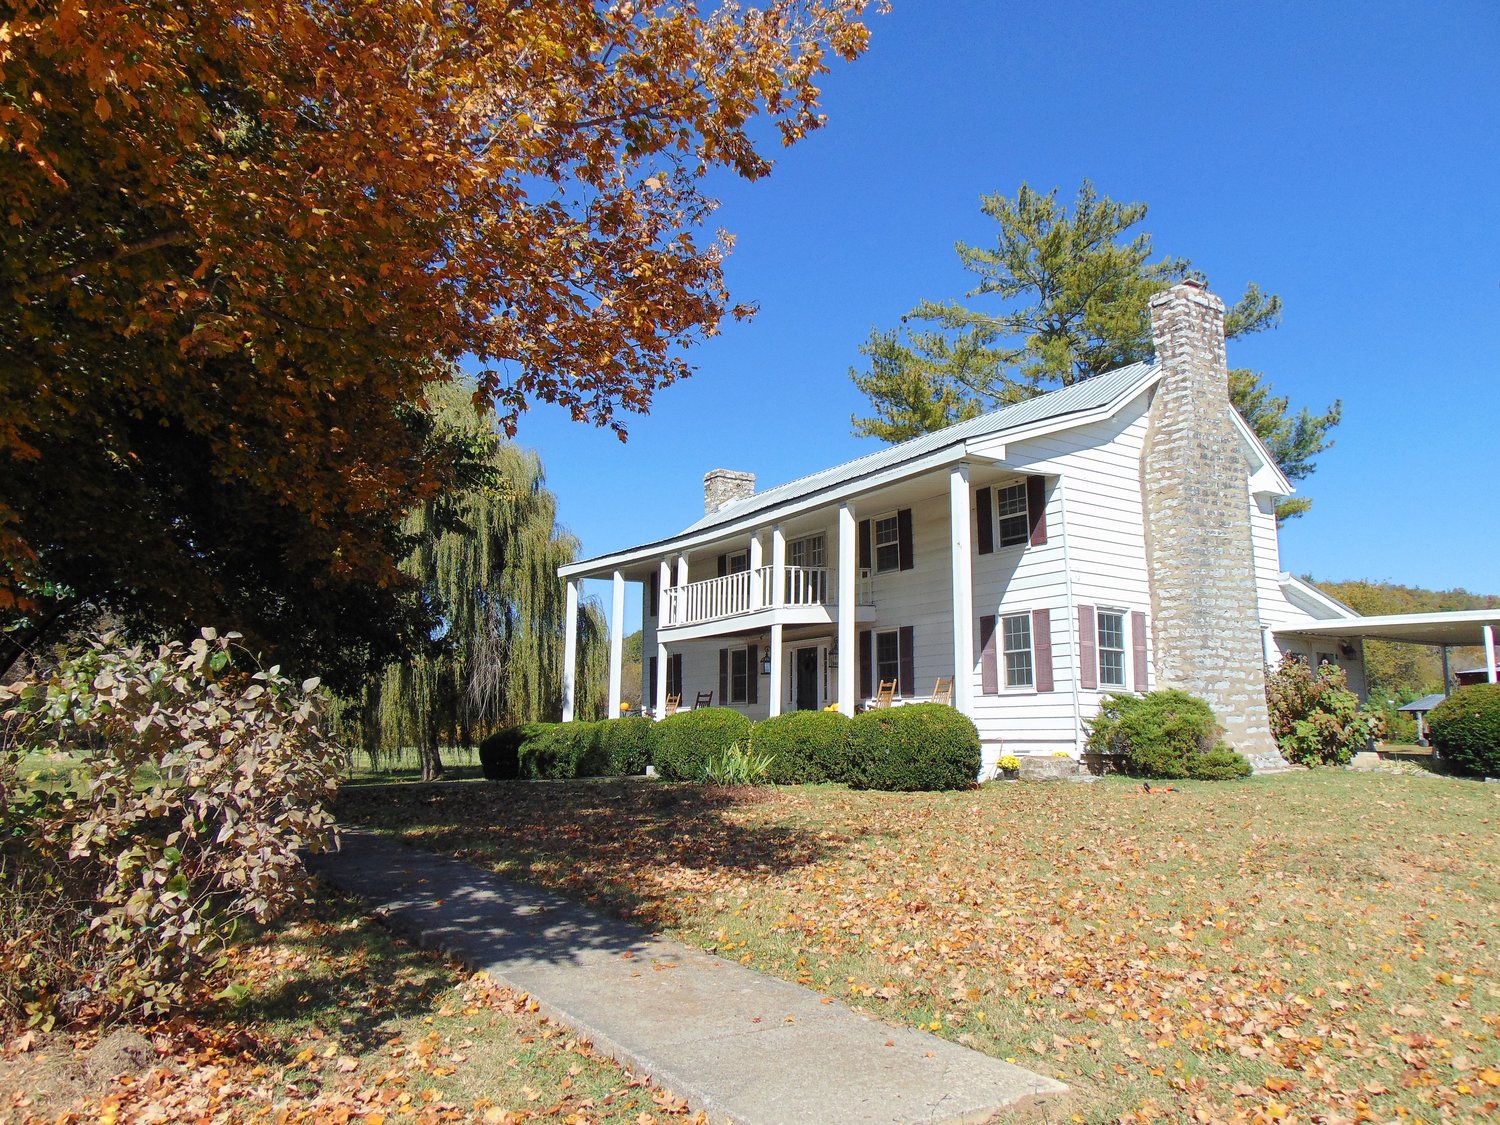 The Maddox Farm is nestled in the rolling hills of Bell Buckle. Autumn leaves
frame the 1853 house like a painting. The Antebellum home is believed to have
served as a hospital during the Civil War.